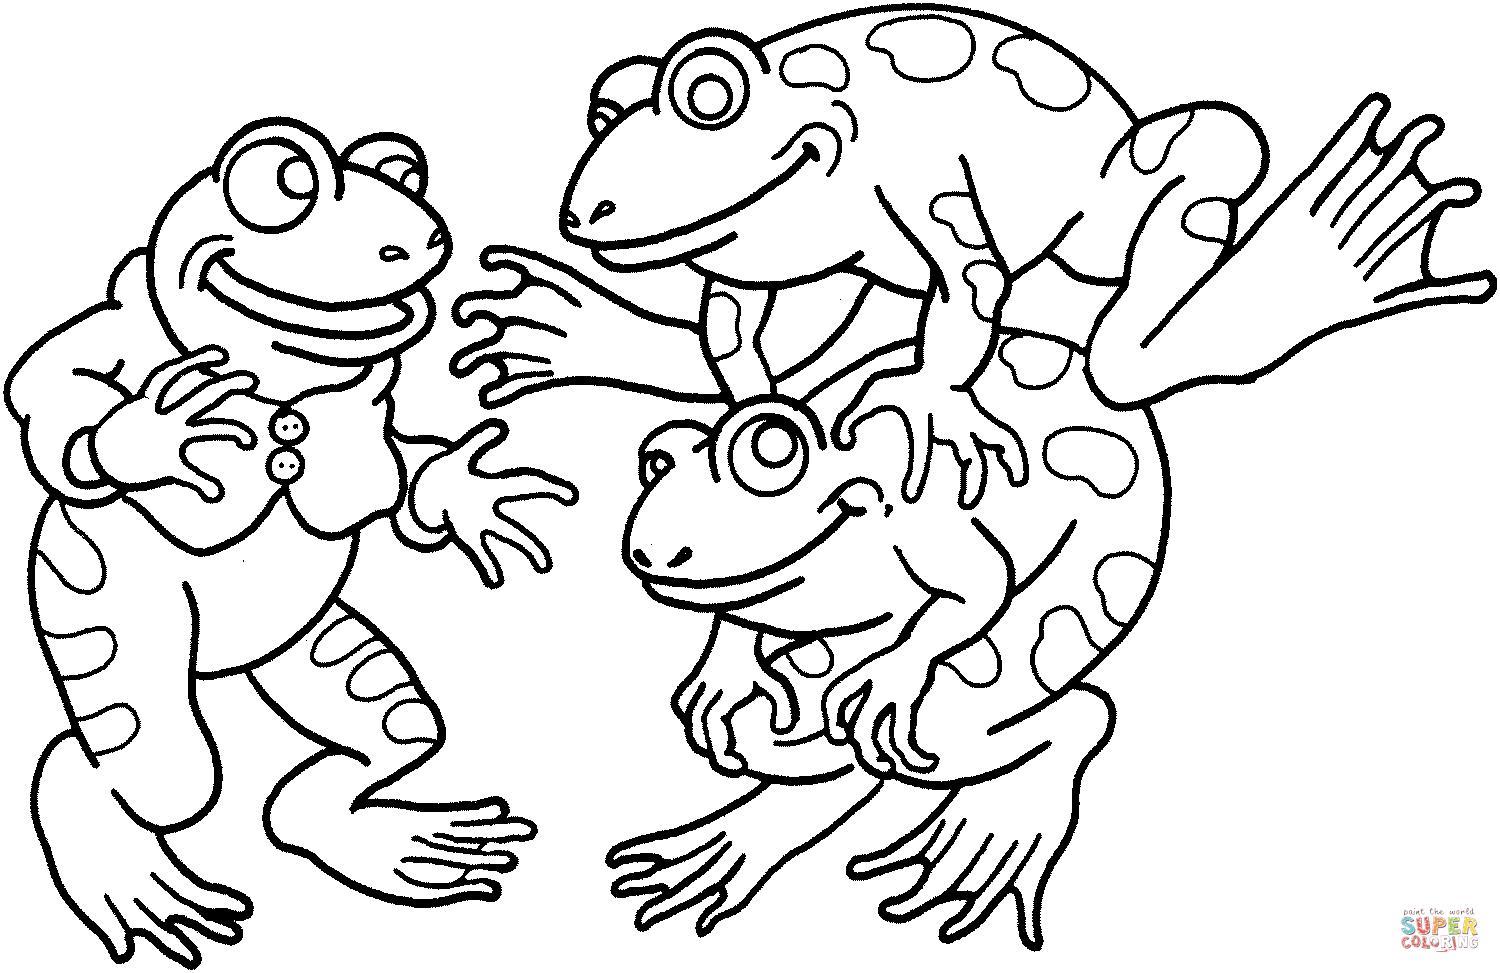 Three Frogs coloring page | Free Printable Coloring Pages